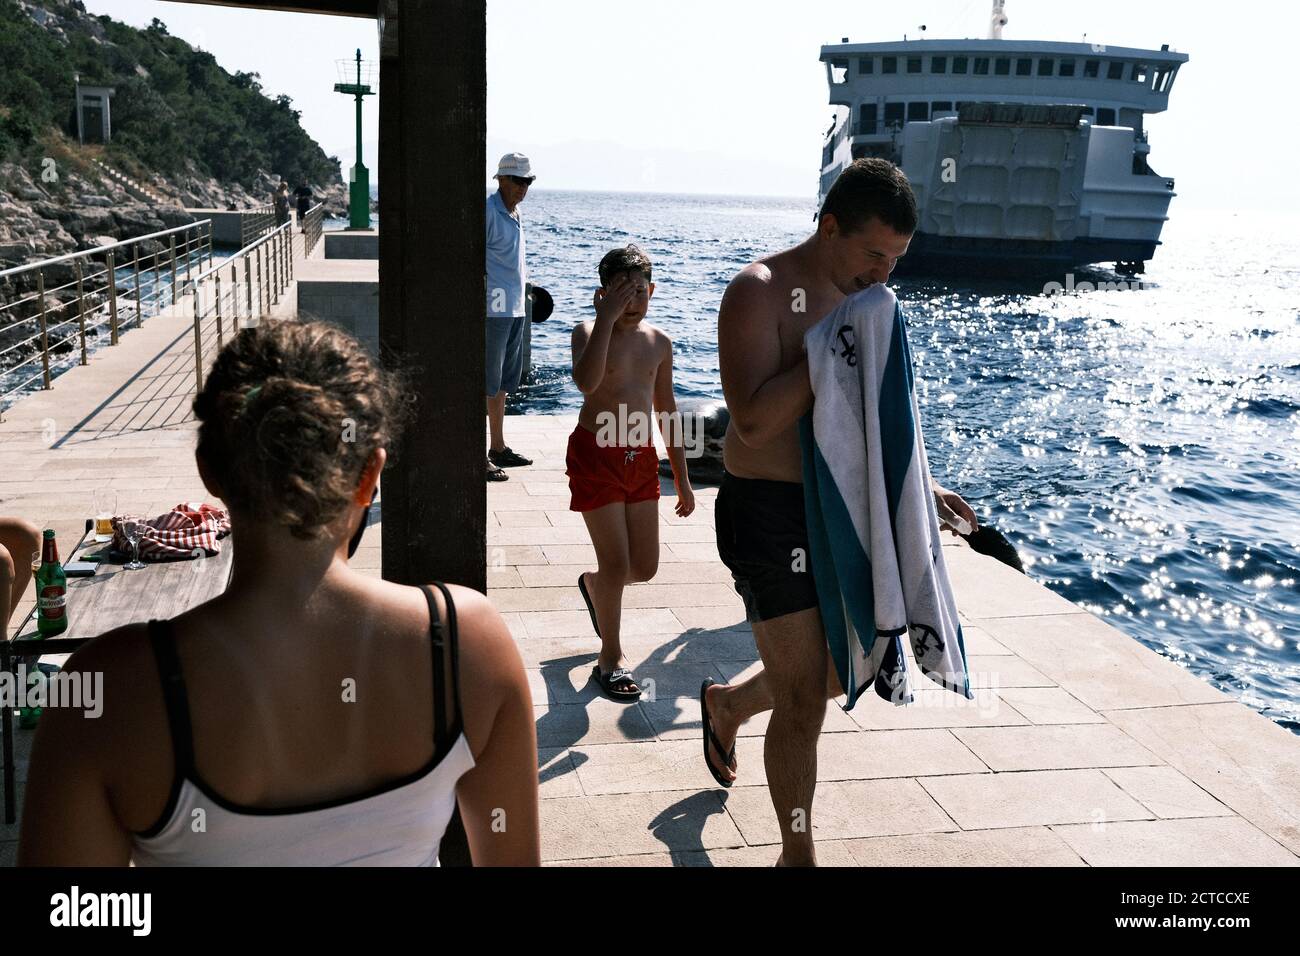 Tourists waiting for a ferry boat in a Croatian port. Stock Photo